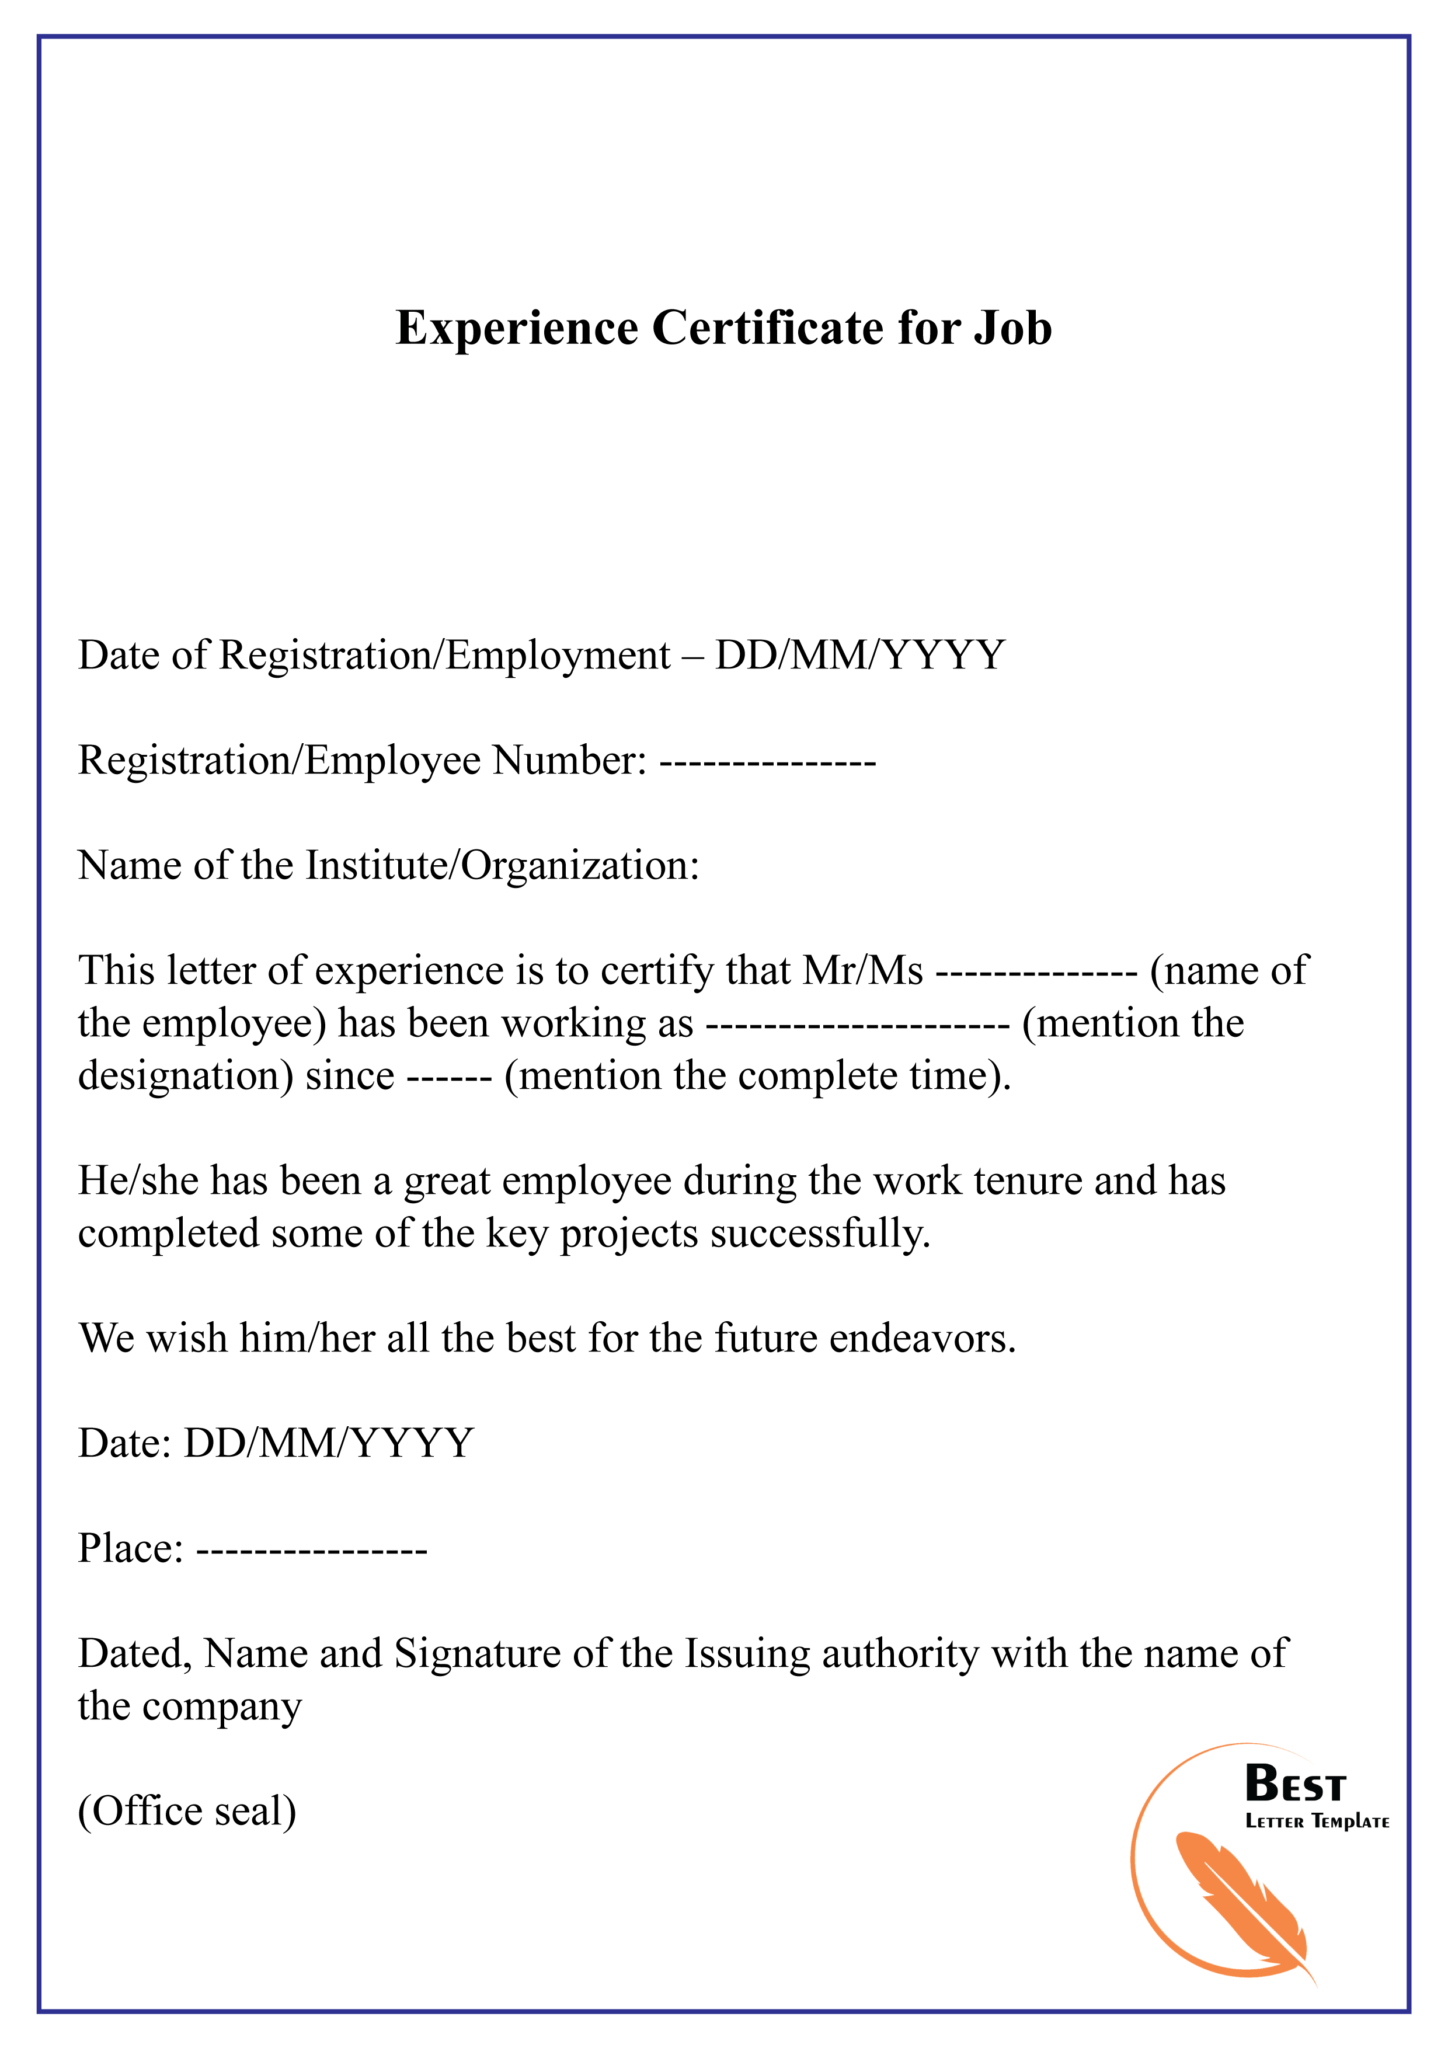 Experience Certificate For Job 01 Best Letter Template Within